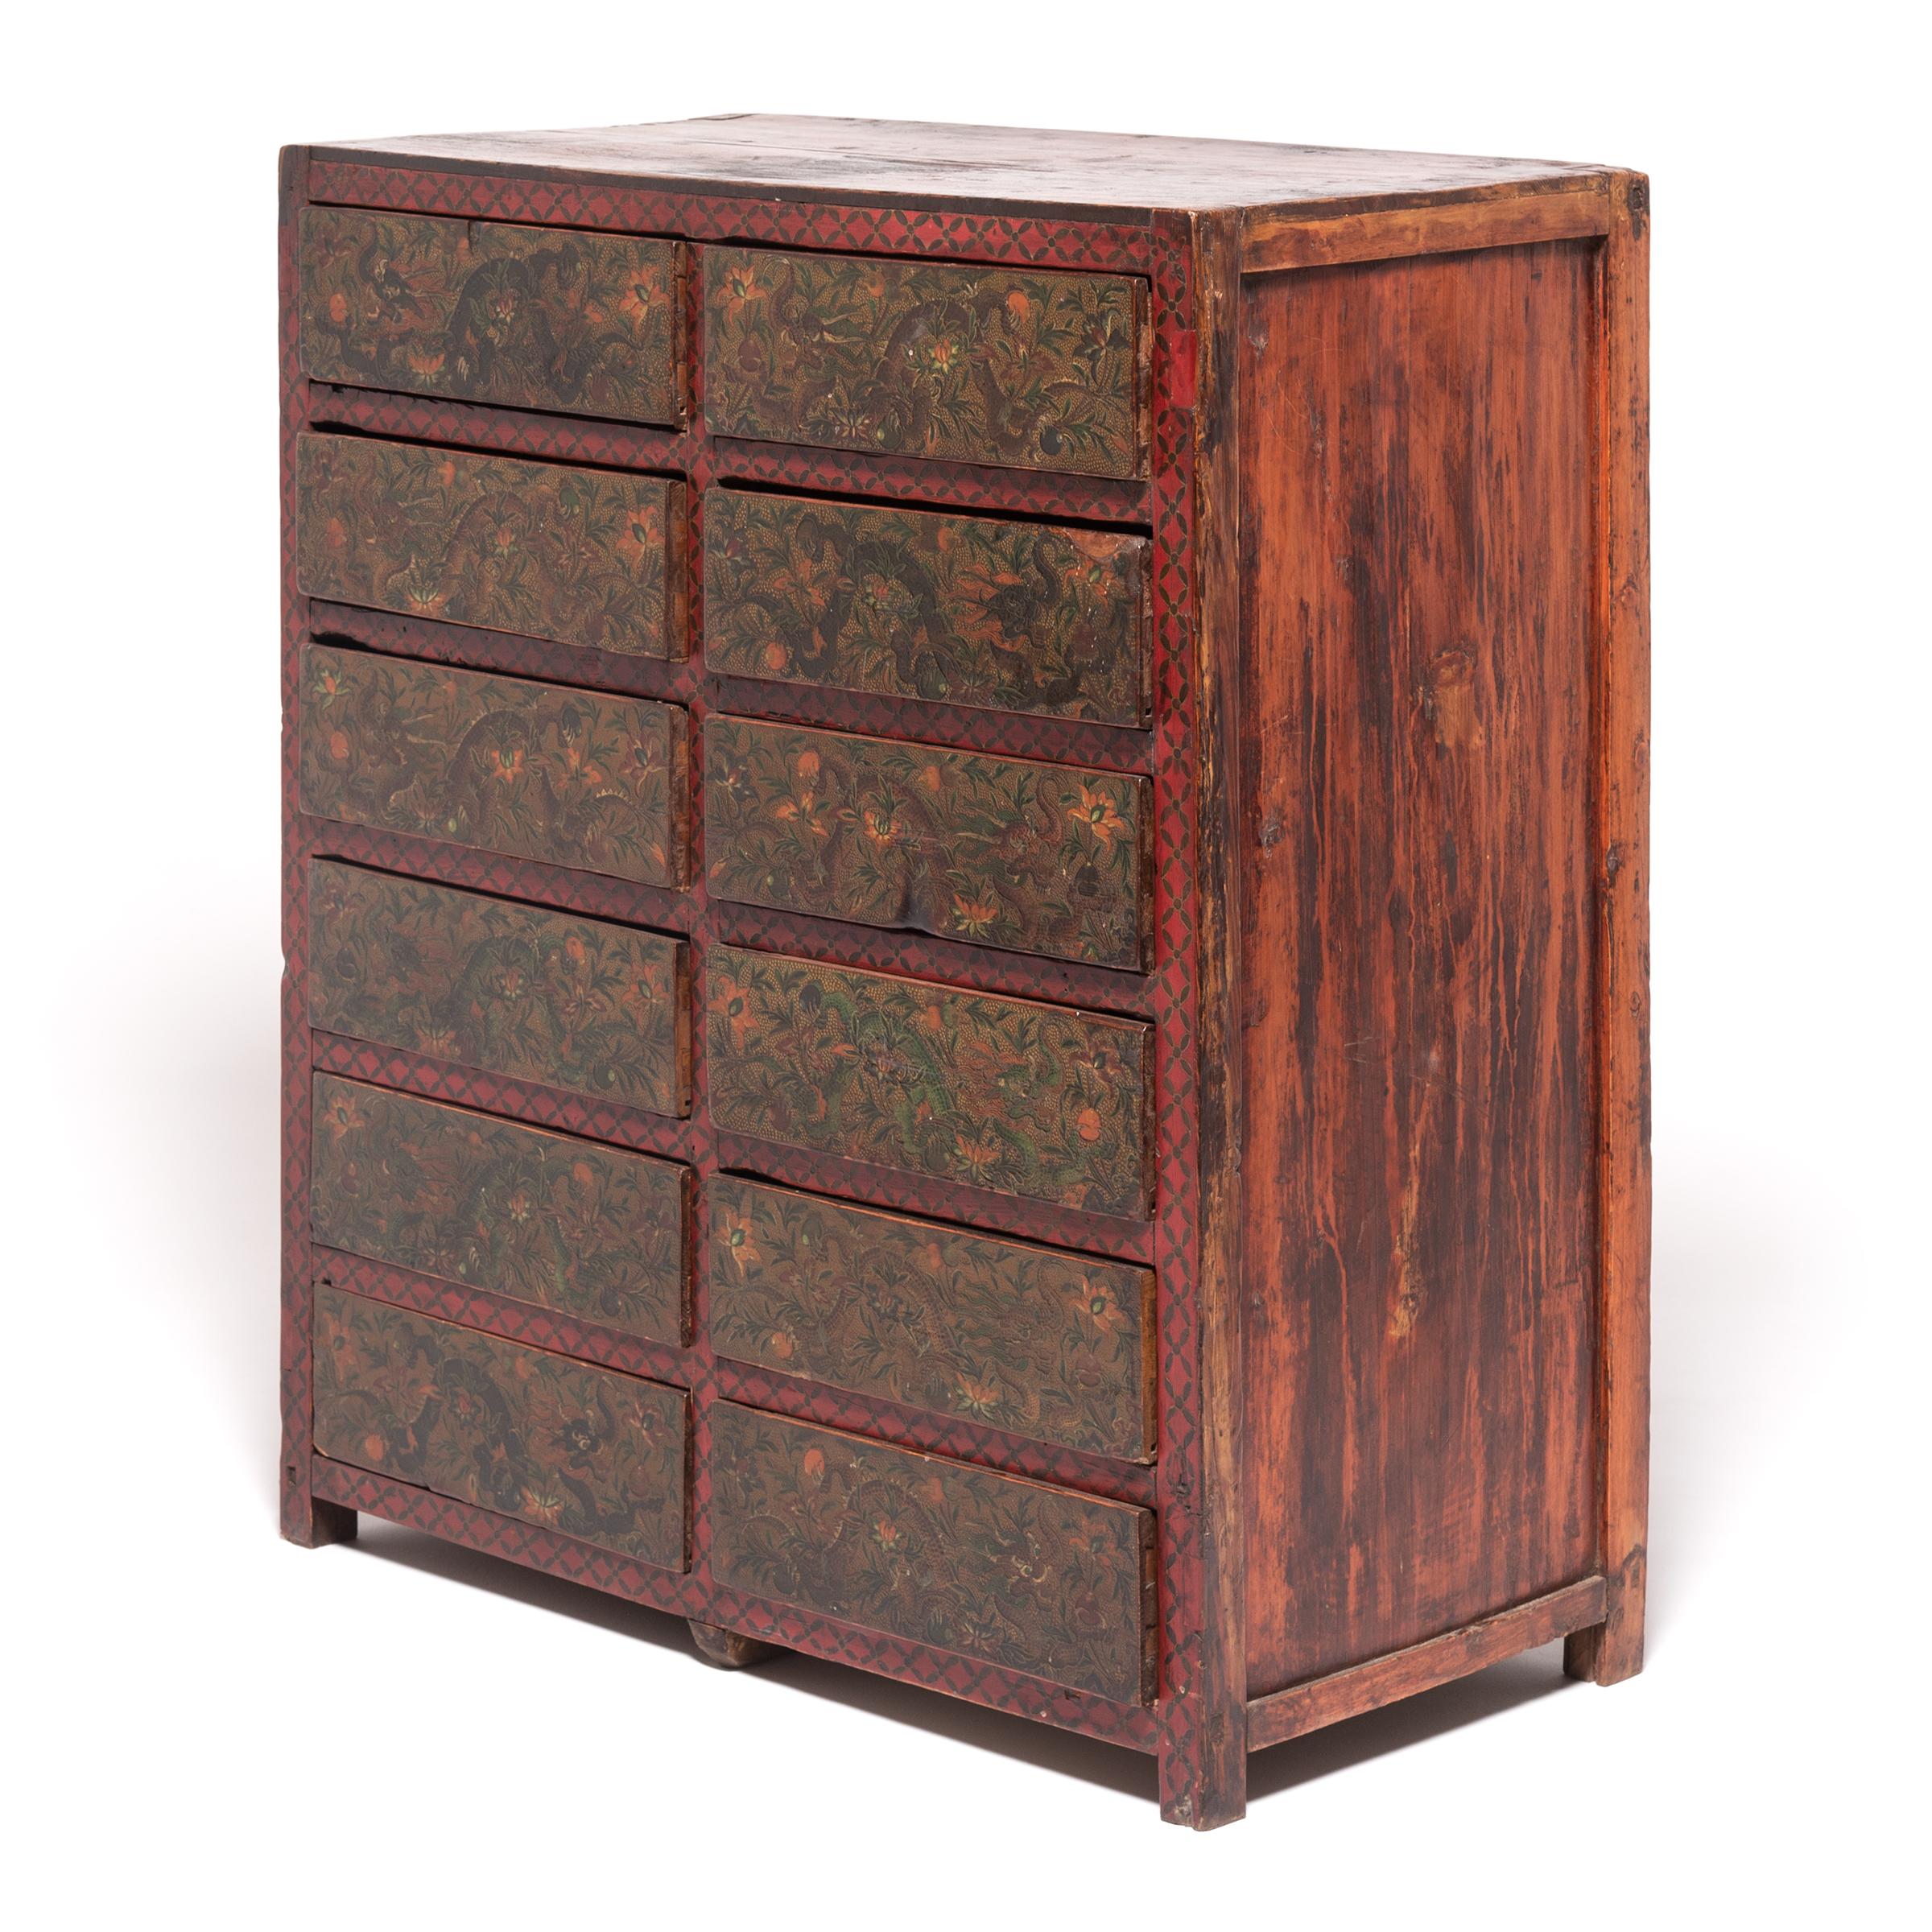 The number 12 figures prominently in Tibetan astrology, making this simple chest’s dozen drawers the perfect canvas to honor the year of the dragon. Tibetan astrology recognizes a 12-year cycle, characterized by 12 animals, including the dragons